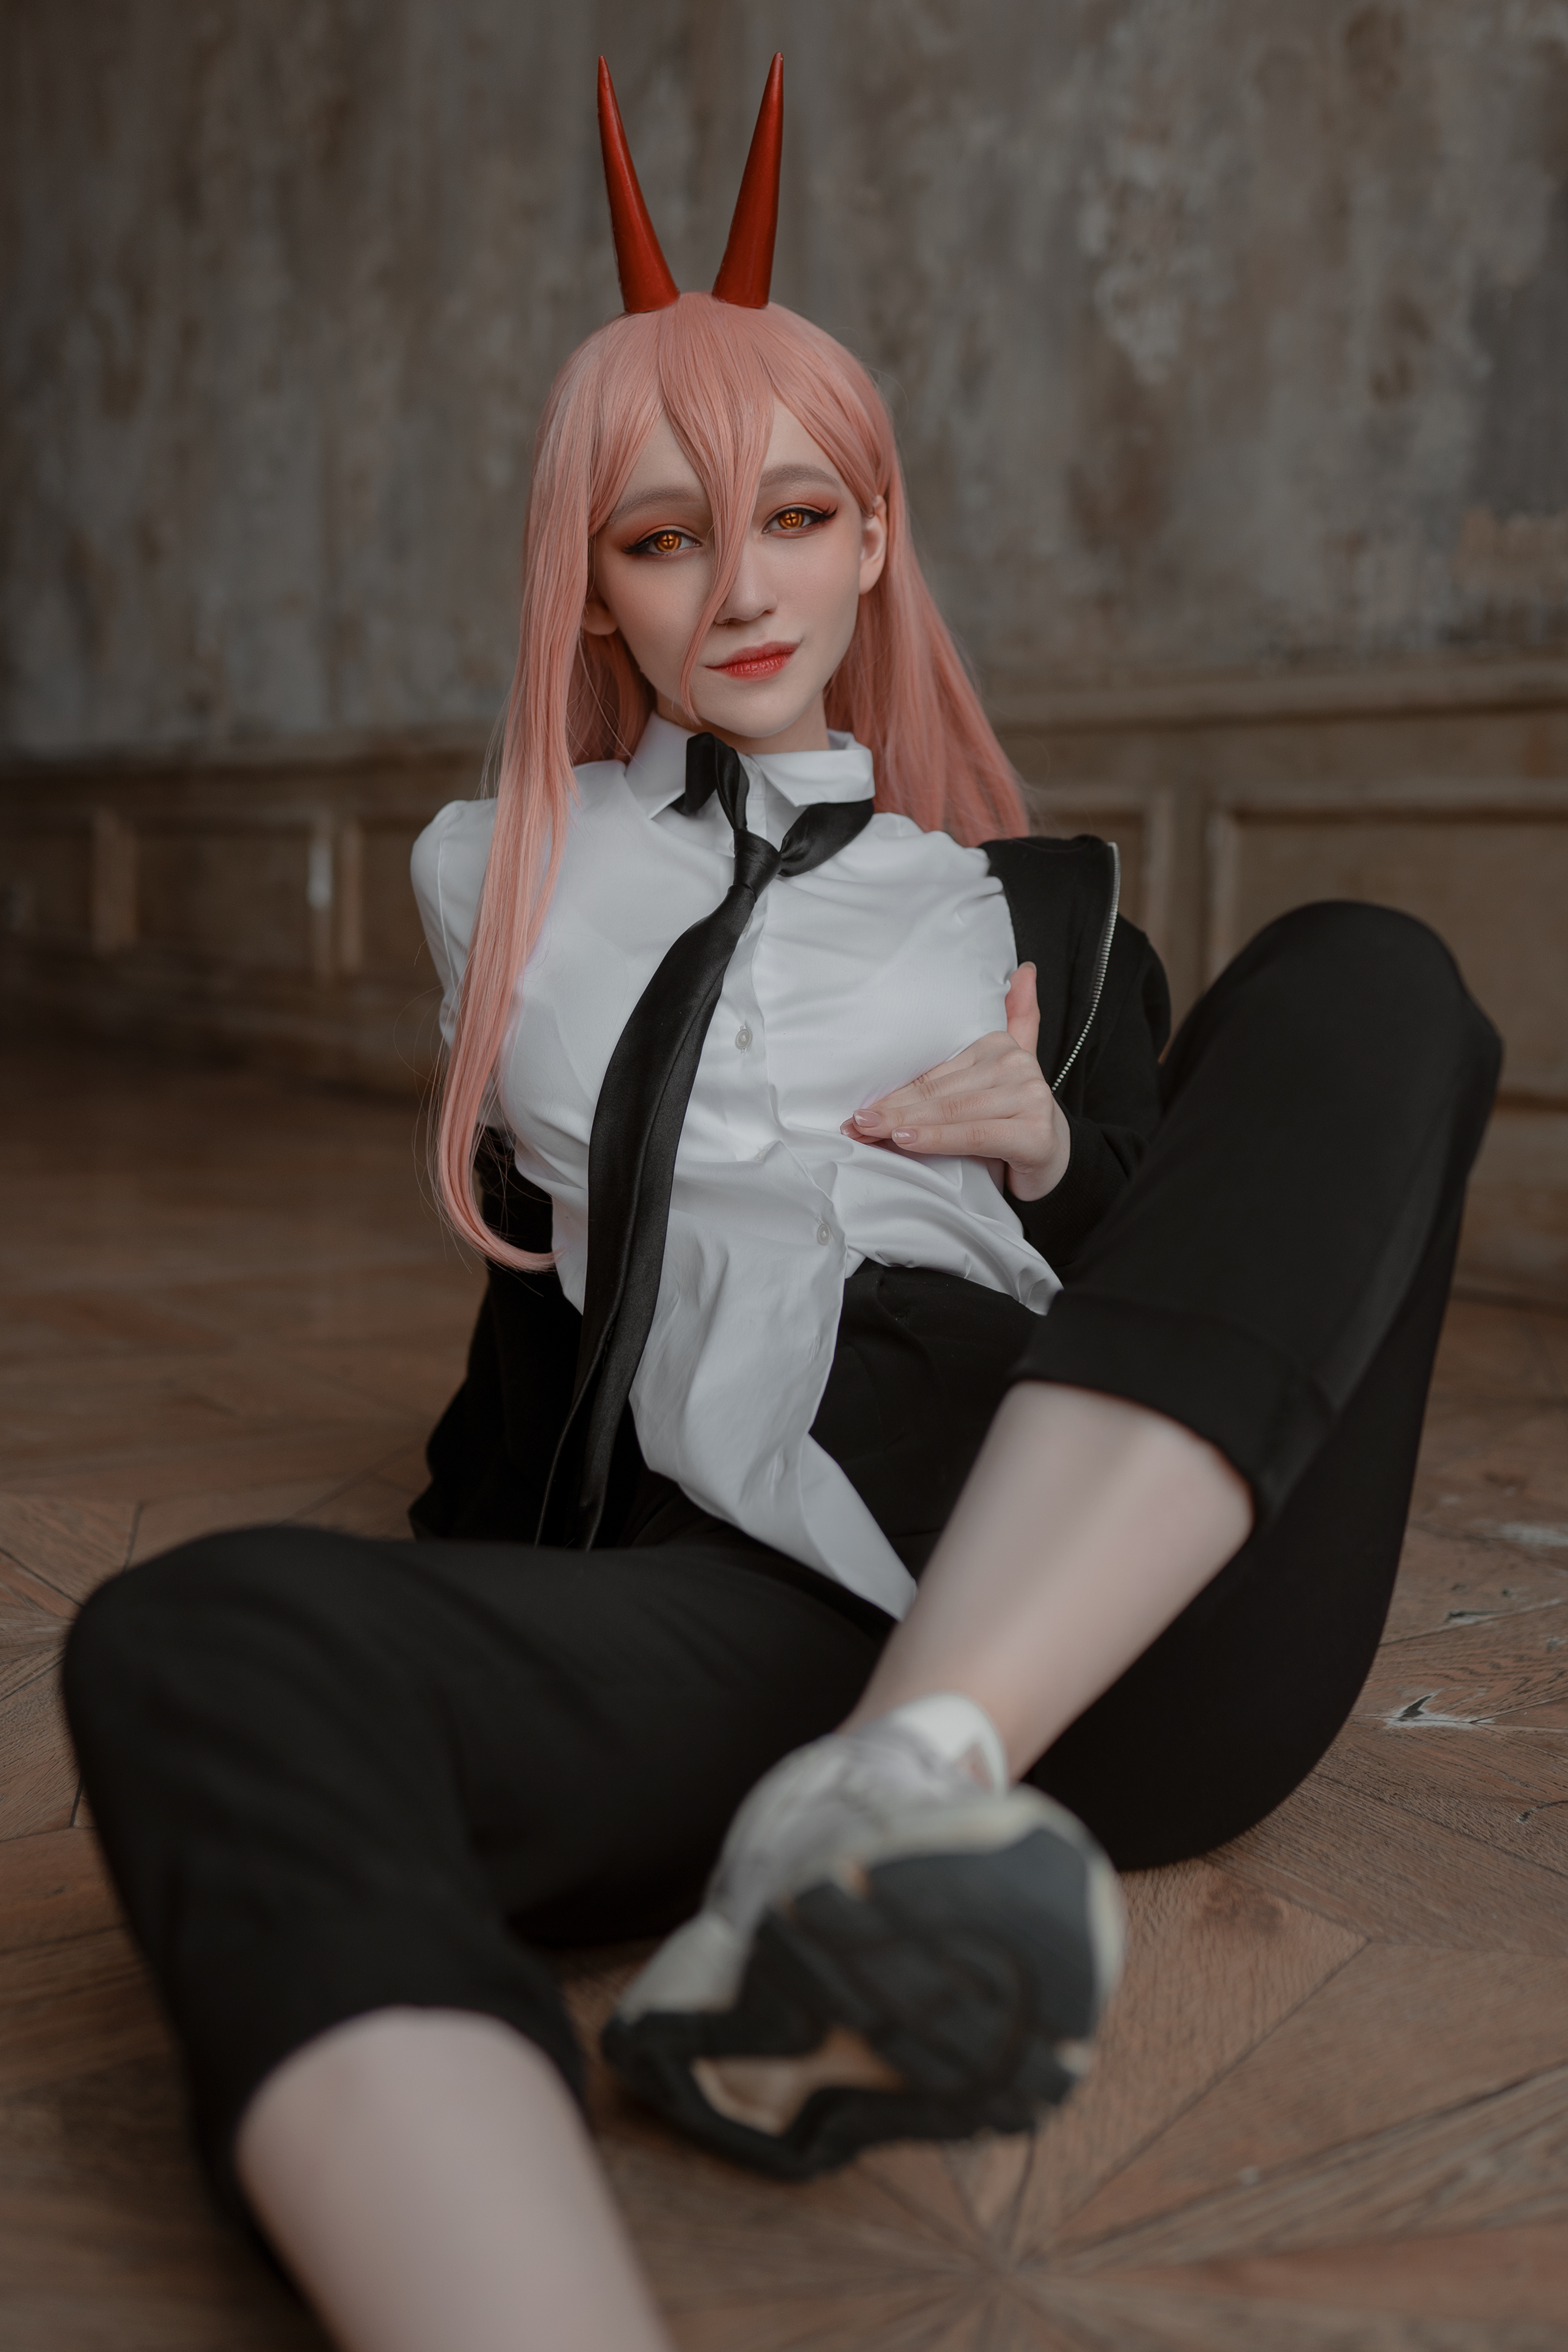 Women Model Cosplay Power Chainsaw Man Chainsaw Man Anime Pink Hair Shirt Tie Pants Sneakers Indoors 2667x4000